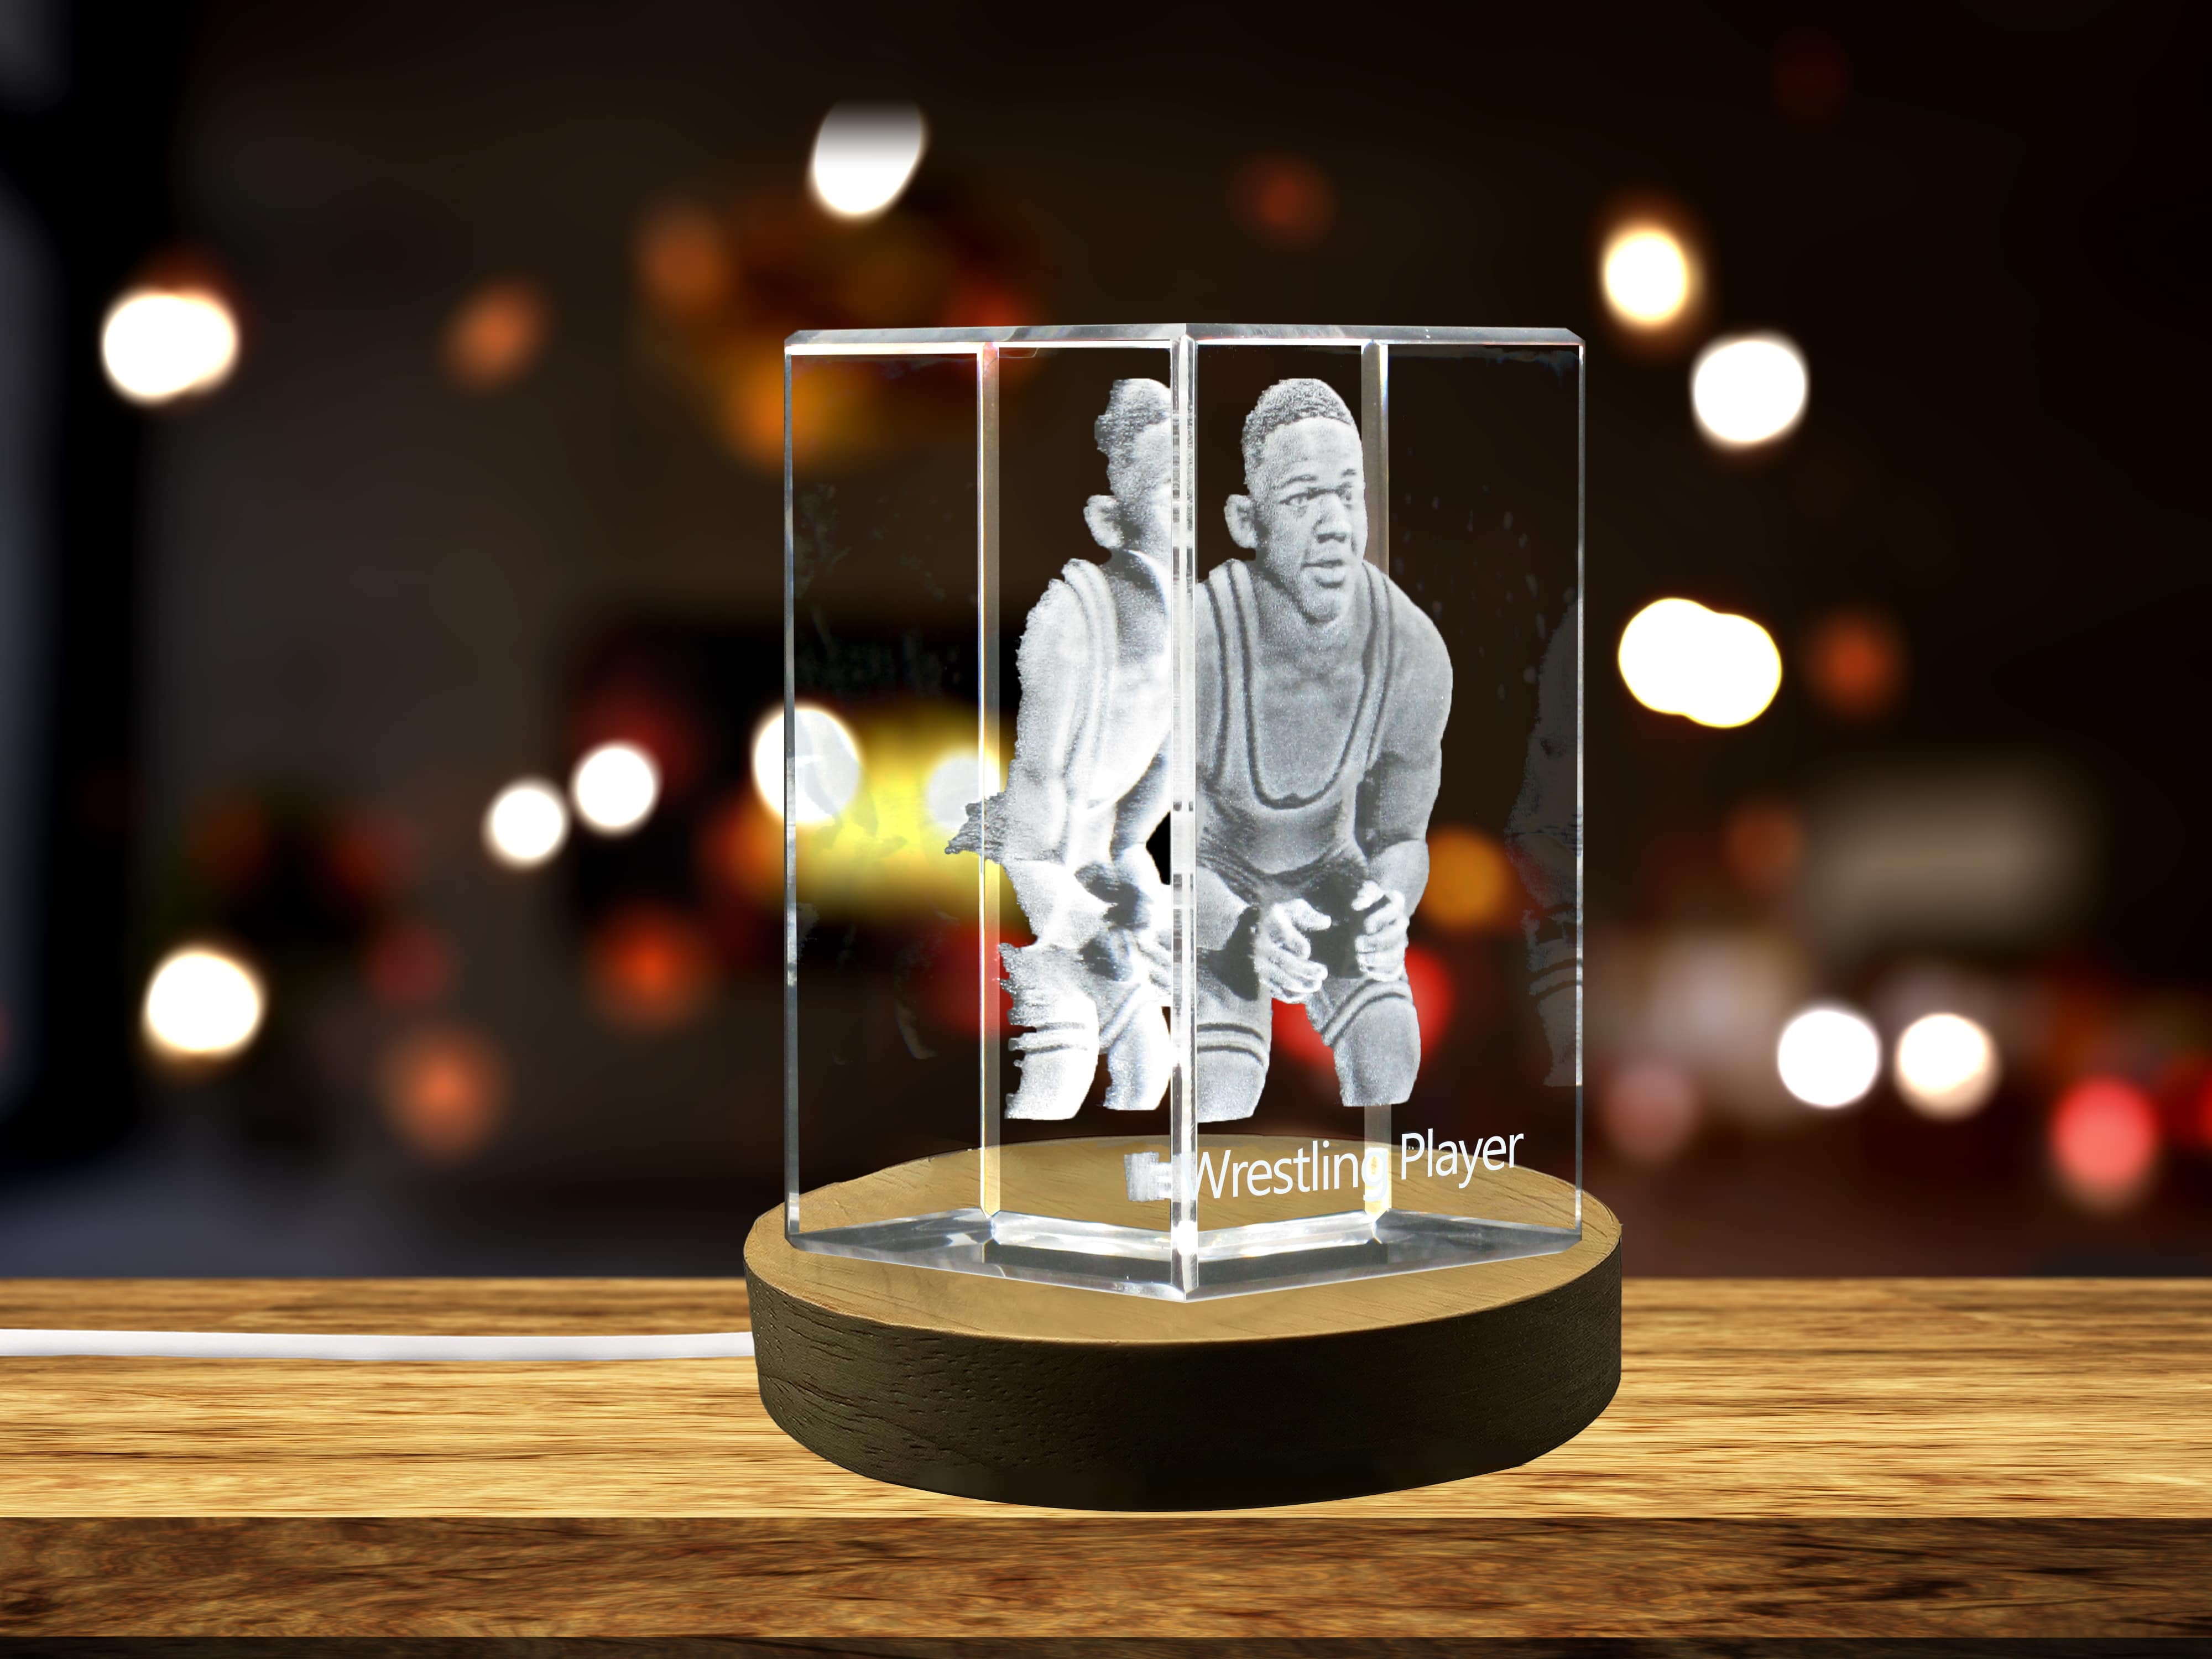 Wrestling Player 3D Engraved Crystal 3D Engraved Crystal Keepsake/Gift/Decor/Collectible/Souvenir A&B Crystal Collection